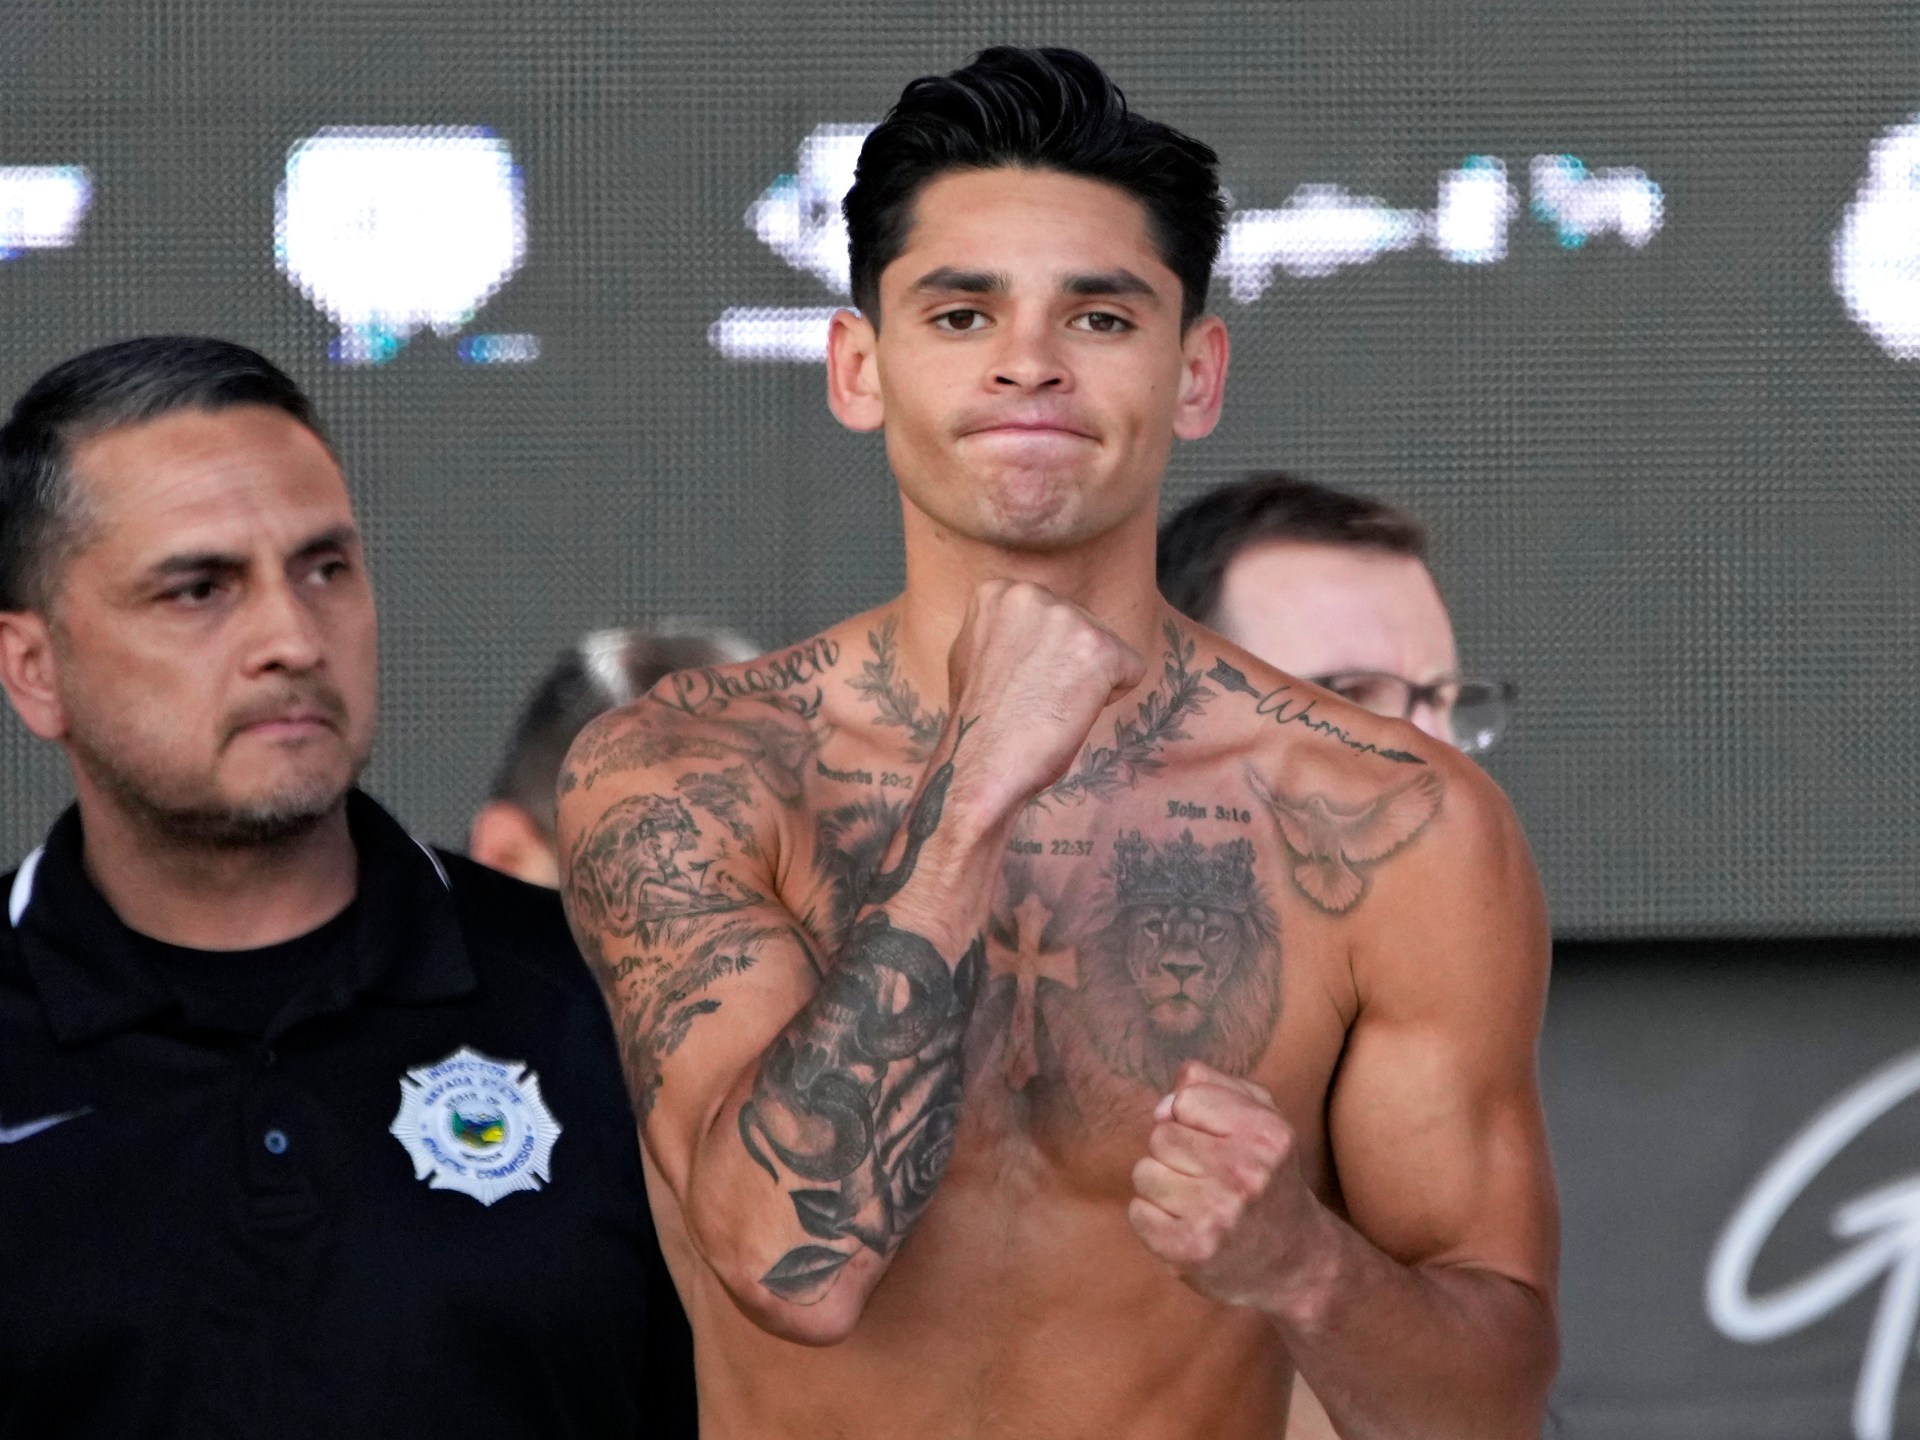 Boxer Ryan Garcia denies using performance-enhancing drugs after beating Devin Haney - Future implications for both boxers and the sport of boxing